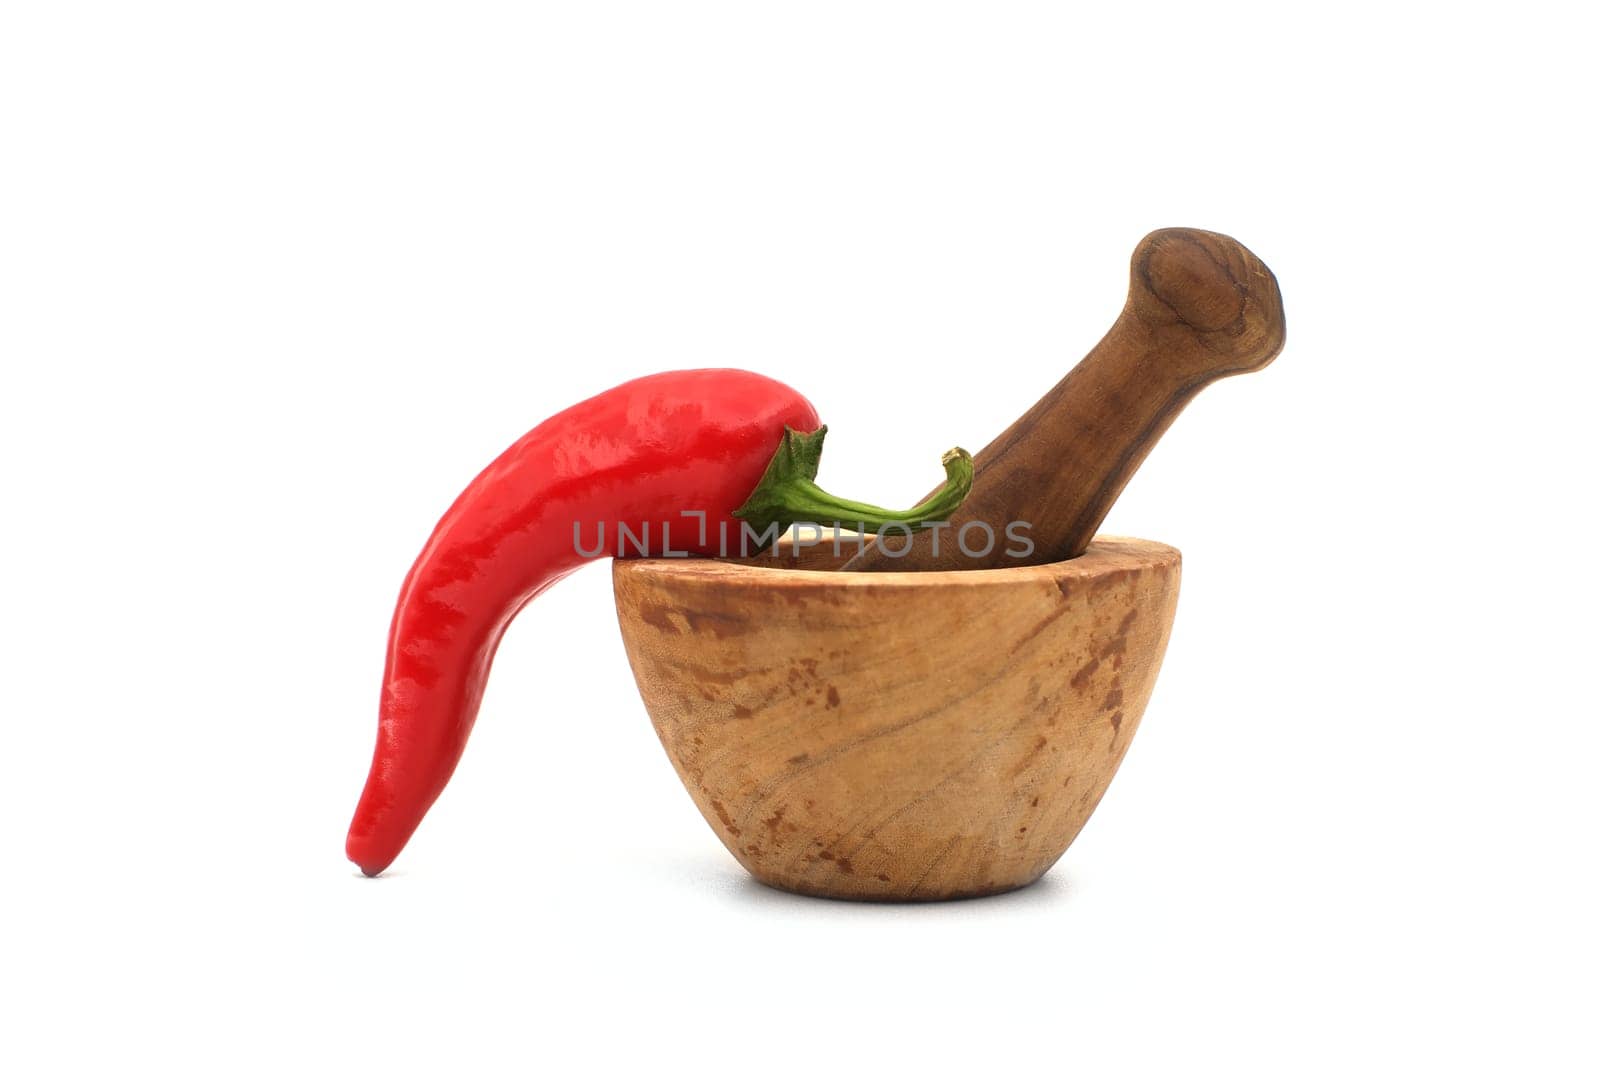 Red chili pepper and wooden pestle with mortar by NetPix